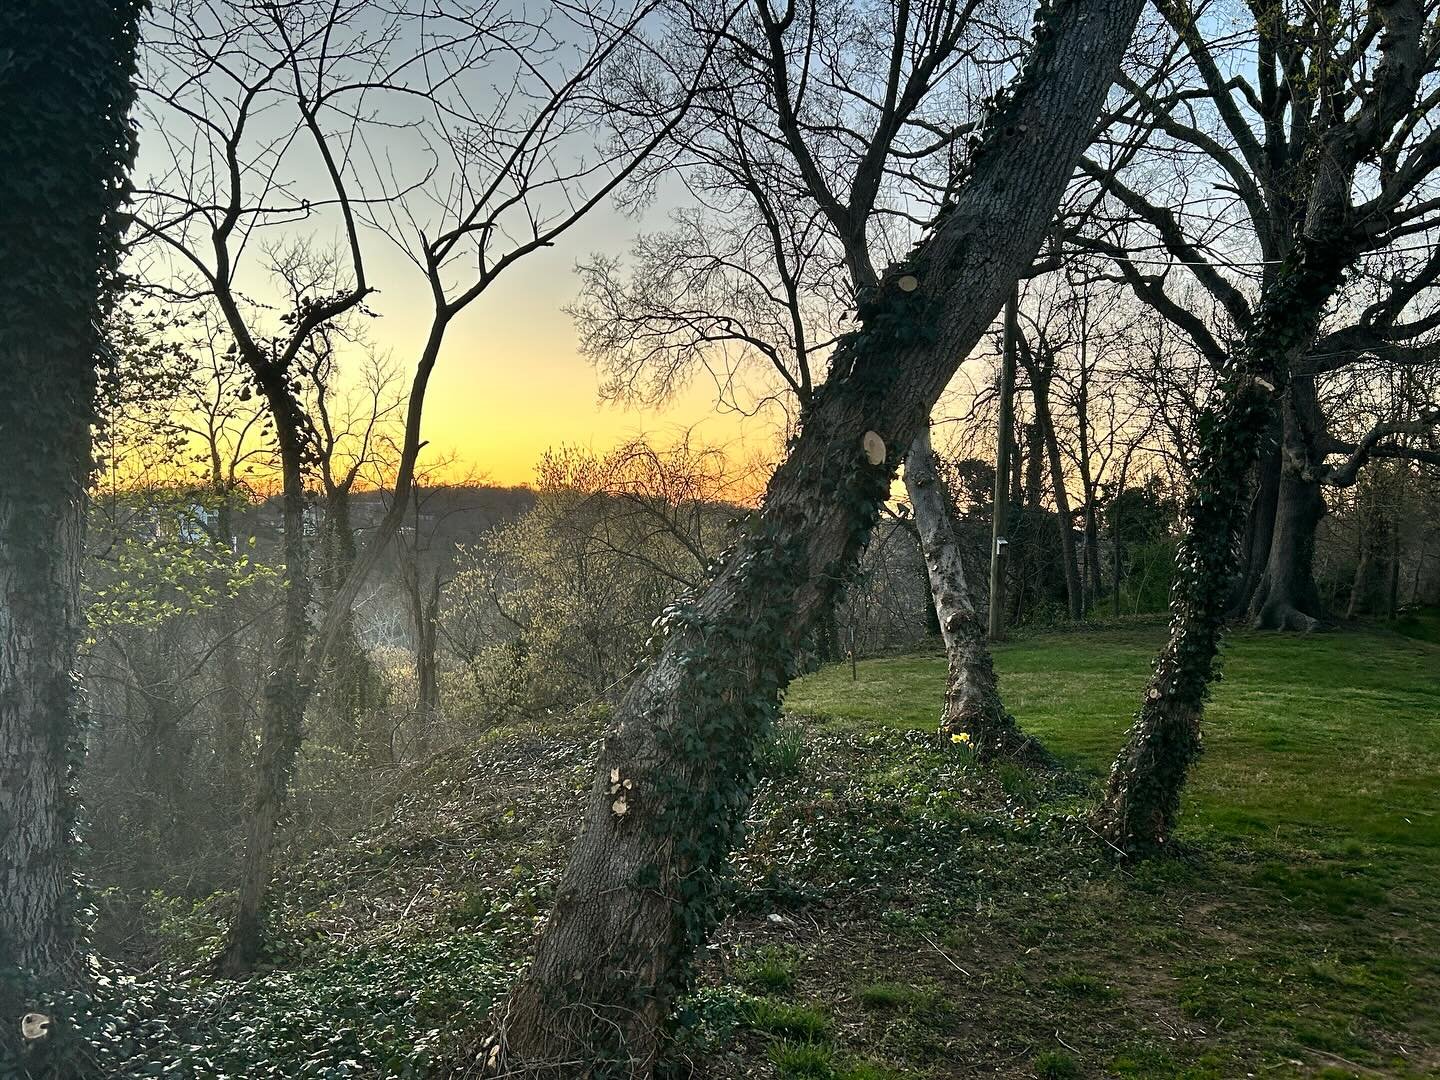 Sunset from a DC cliff

#Potomac
#Palisades
#ParadigmShift